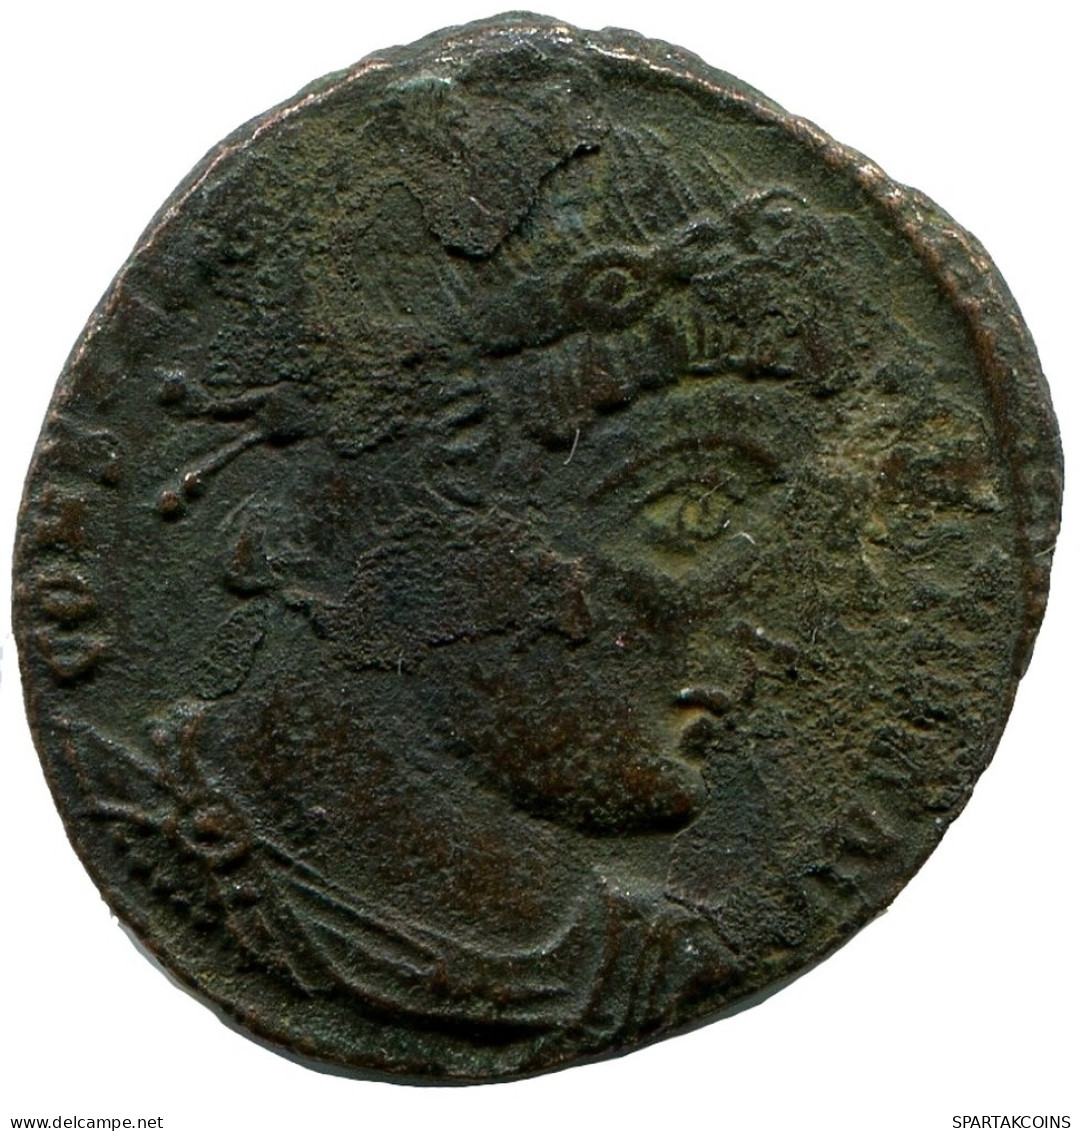 CONSTANTINE I MINTED IN ANTIOCH FOUND IN IHNASYAH HOARD EGYPT #ANC10590.14.E.A - The Christian Empire (307 AD Tot 363 AD)